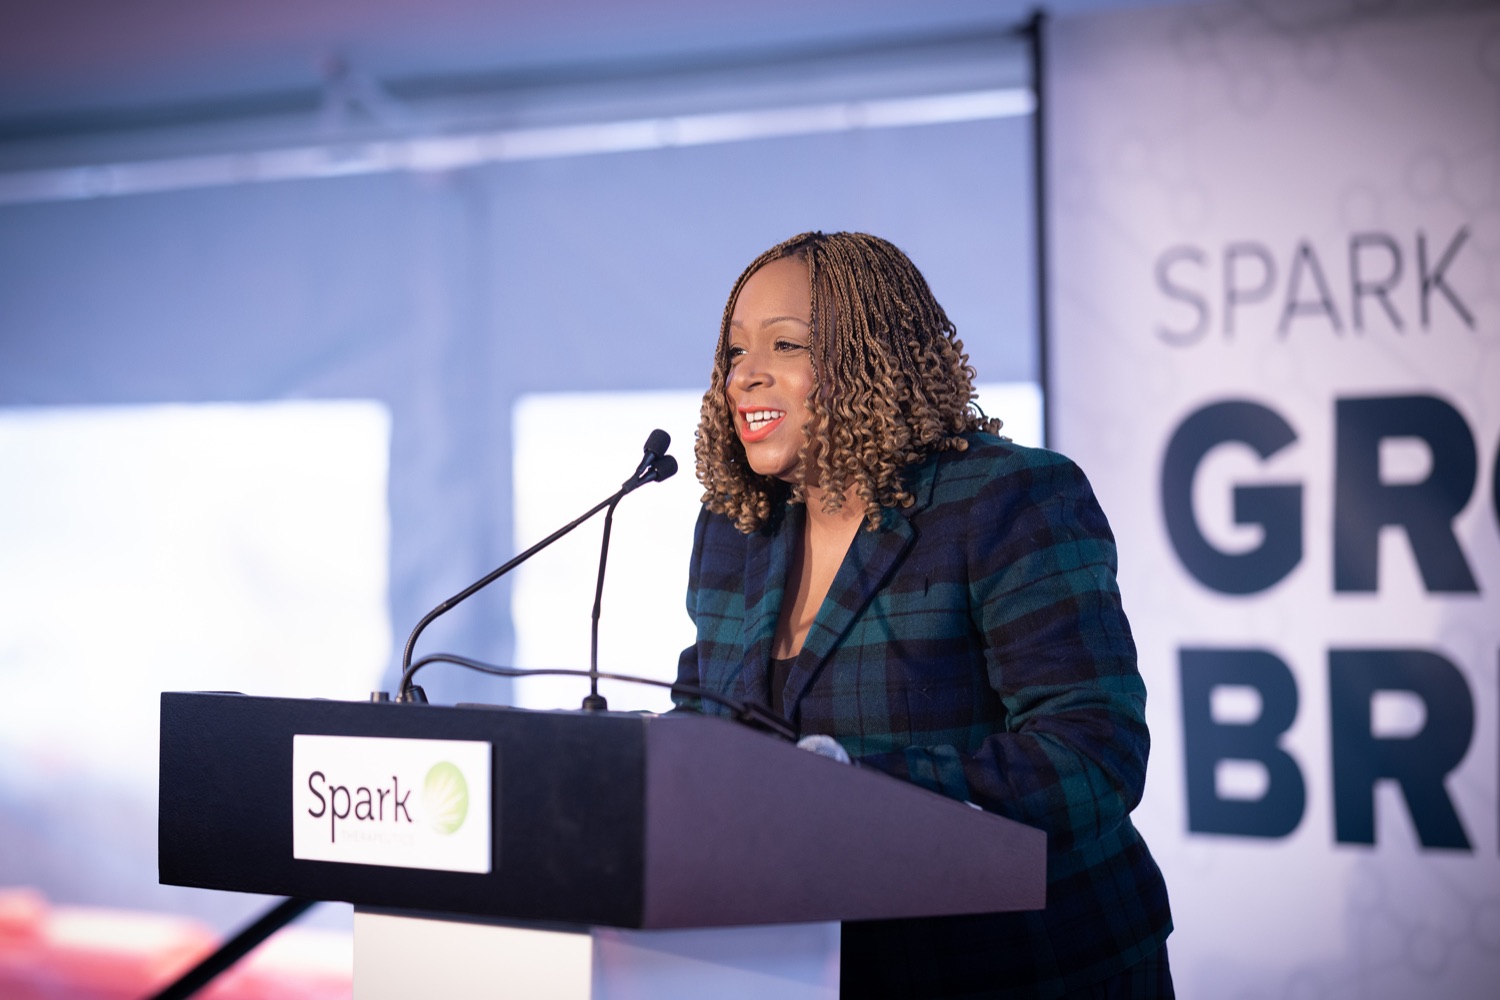 Jamie R. Gauthier Philadelphia City Councilmember speaks with the press.   Pennsylvania Governor Josh Shapiro participates in a groundbreaking for Spark Therapeutics at the future site of their new building, at 30th and Chestnut streets.  FEBRUARY 28, 2023 - PHILADELPHIA, PA<br><a href="https://filesource.amperwave.net/commonwealthofpa/photo/22728_gov_spark_dz_0006.JPG" target="_blank">⇣ Download Photo</a>